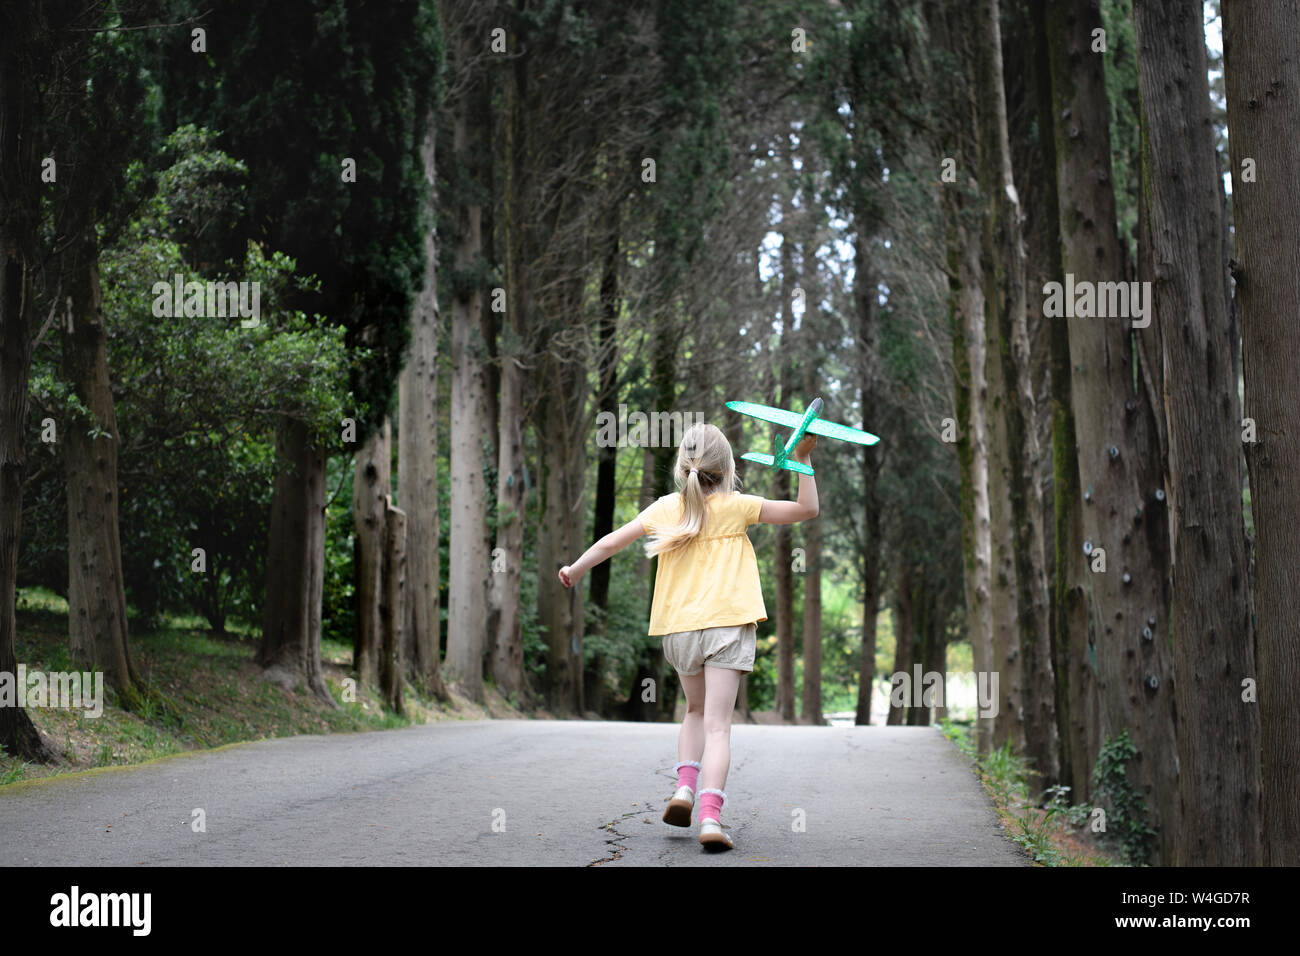 Girl with toy plane running on a treelined road Stock Photo